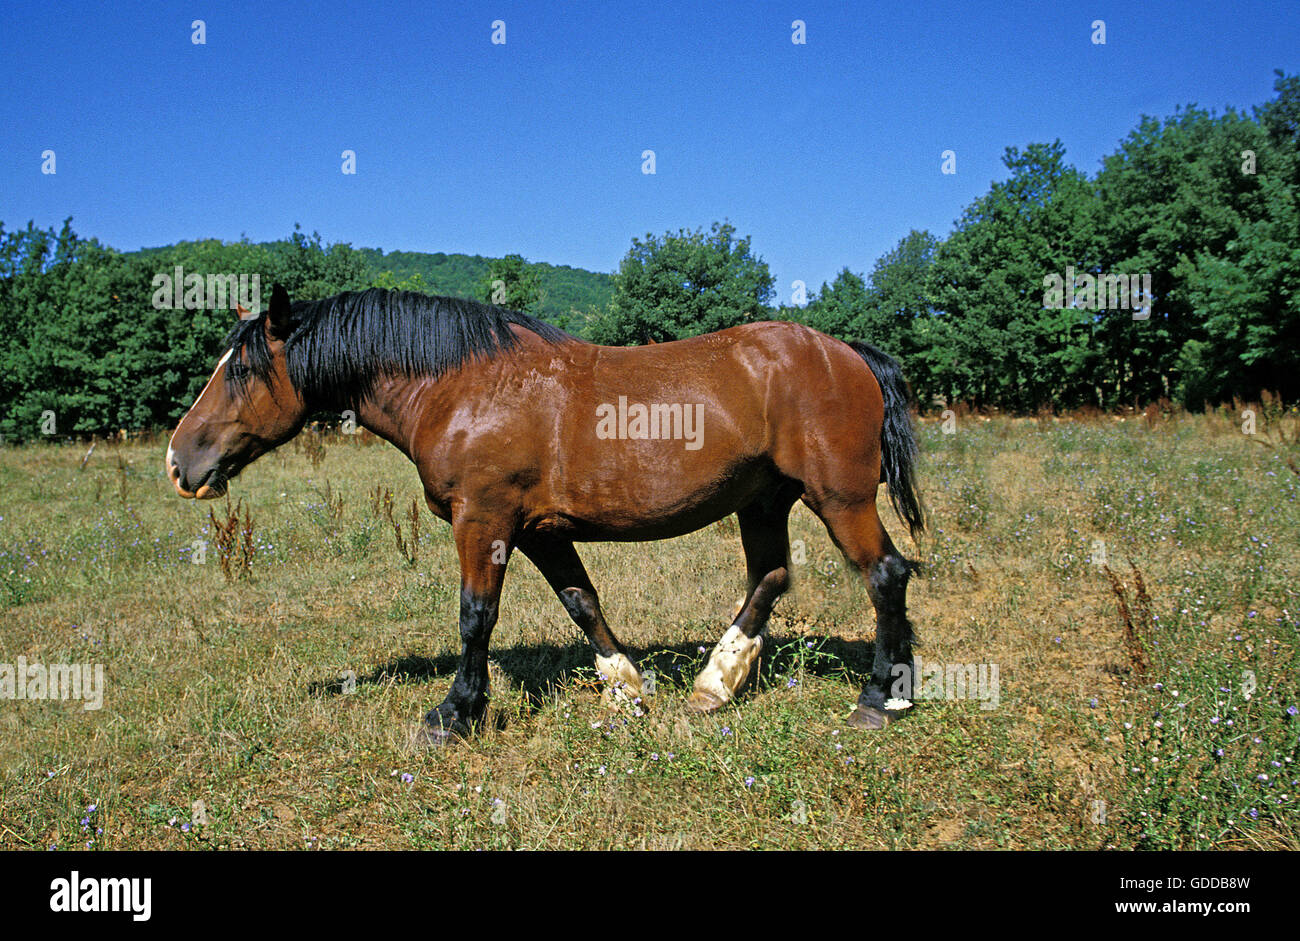 COB NORMAND HORSE, ADULT STANDING ON GRASS Stock Photo